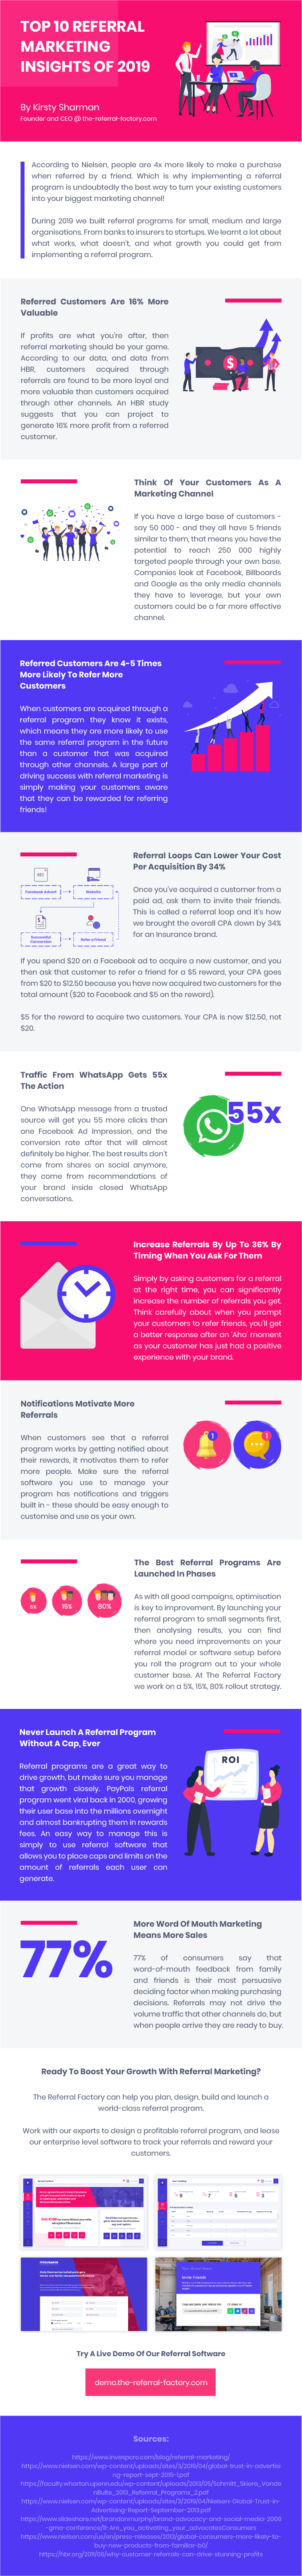 top 10 referral marketing insights 2019 infographic